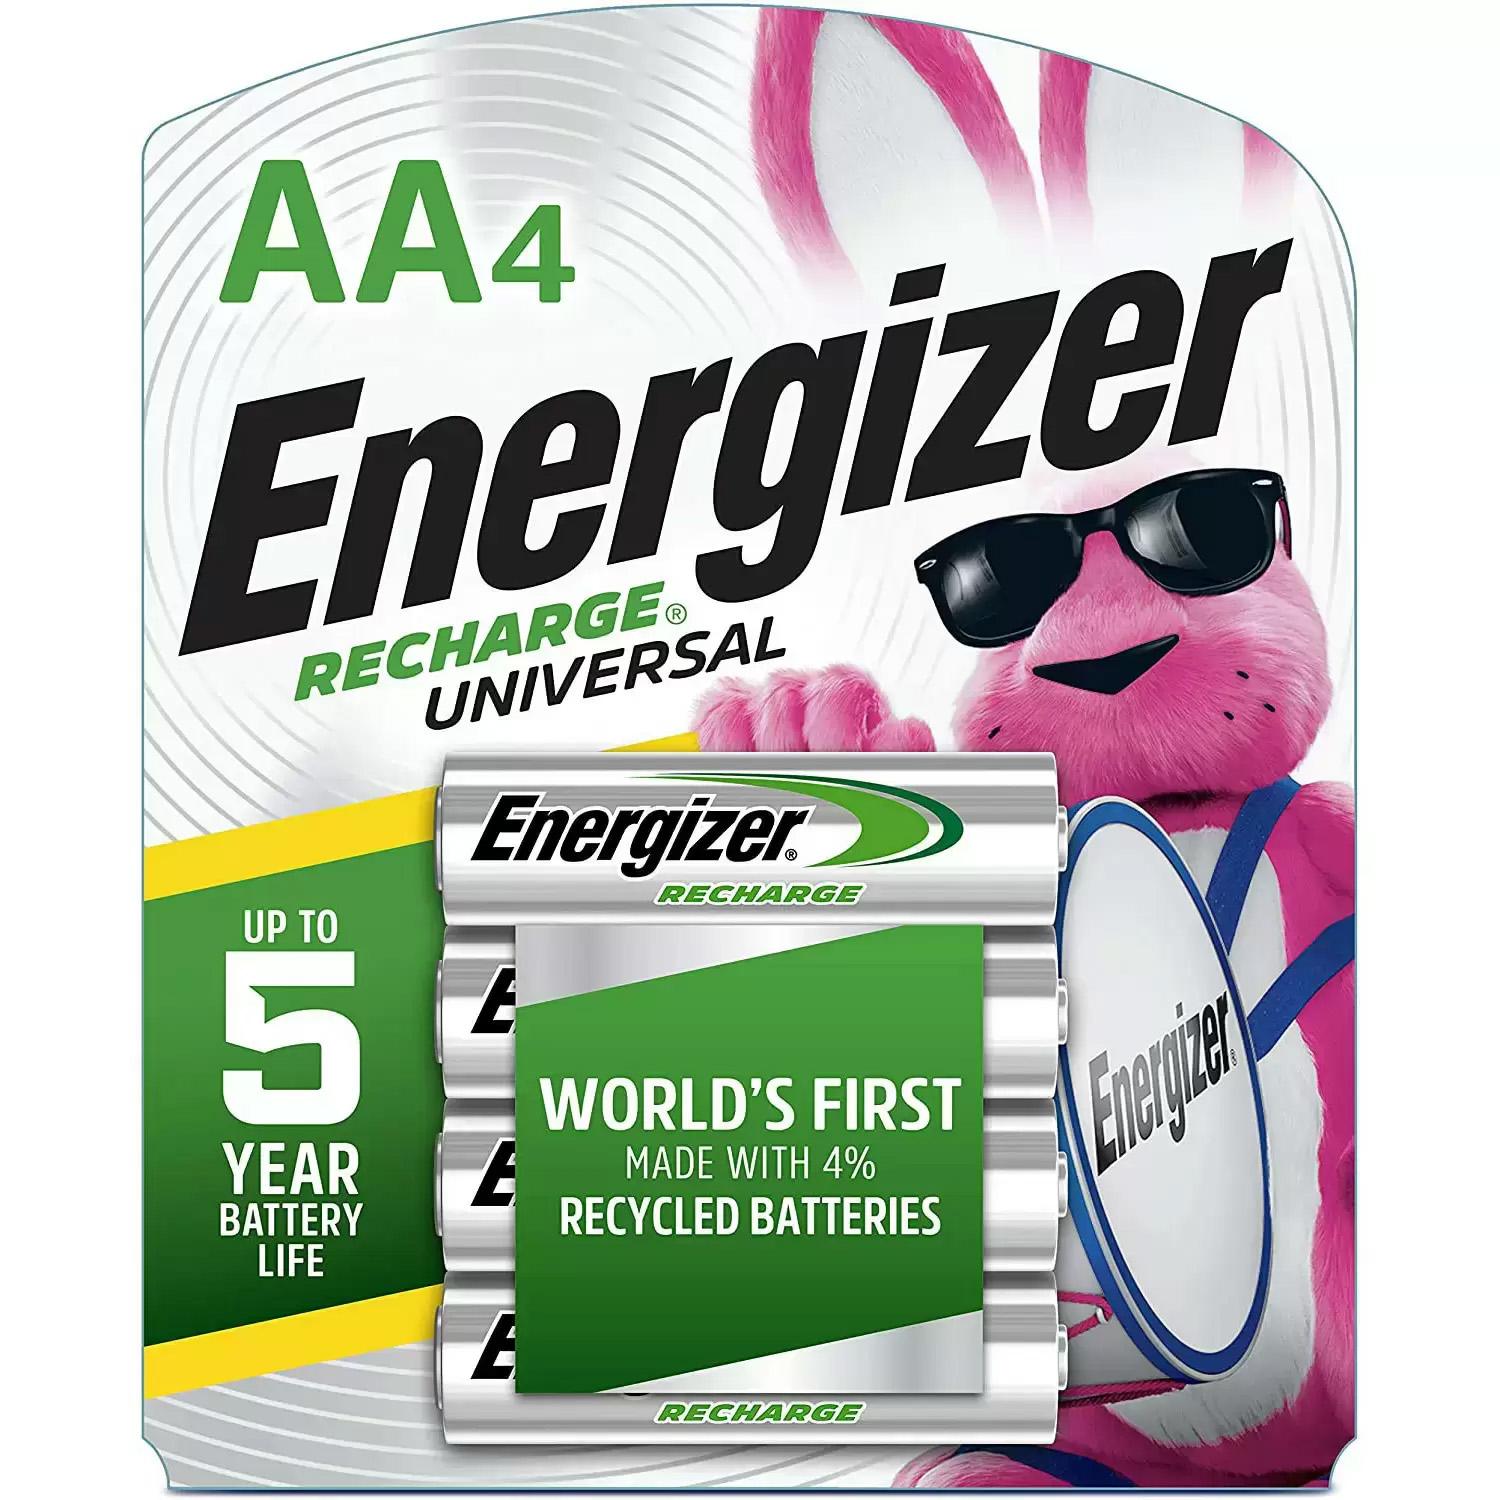 4 Energizer Rechargeable AA NiMH Batteries for $7.19